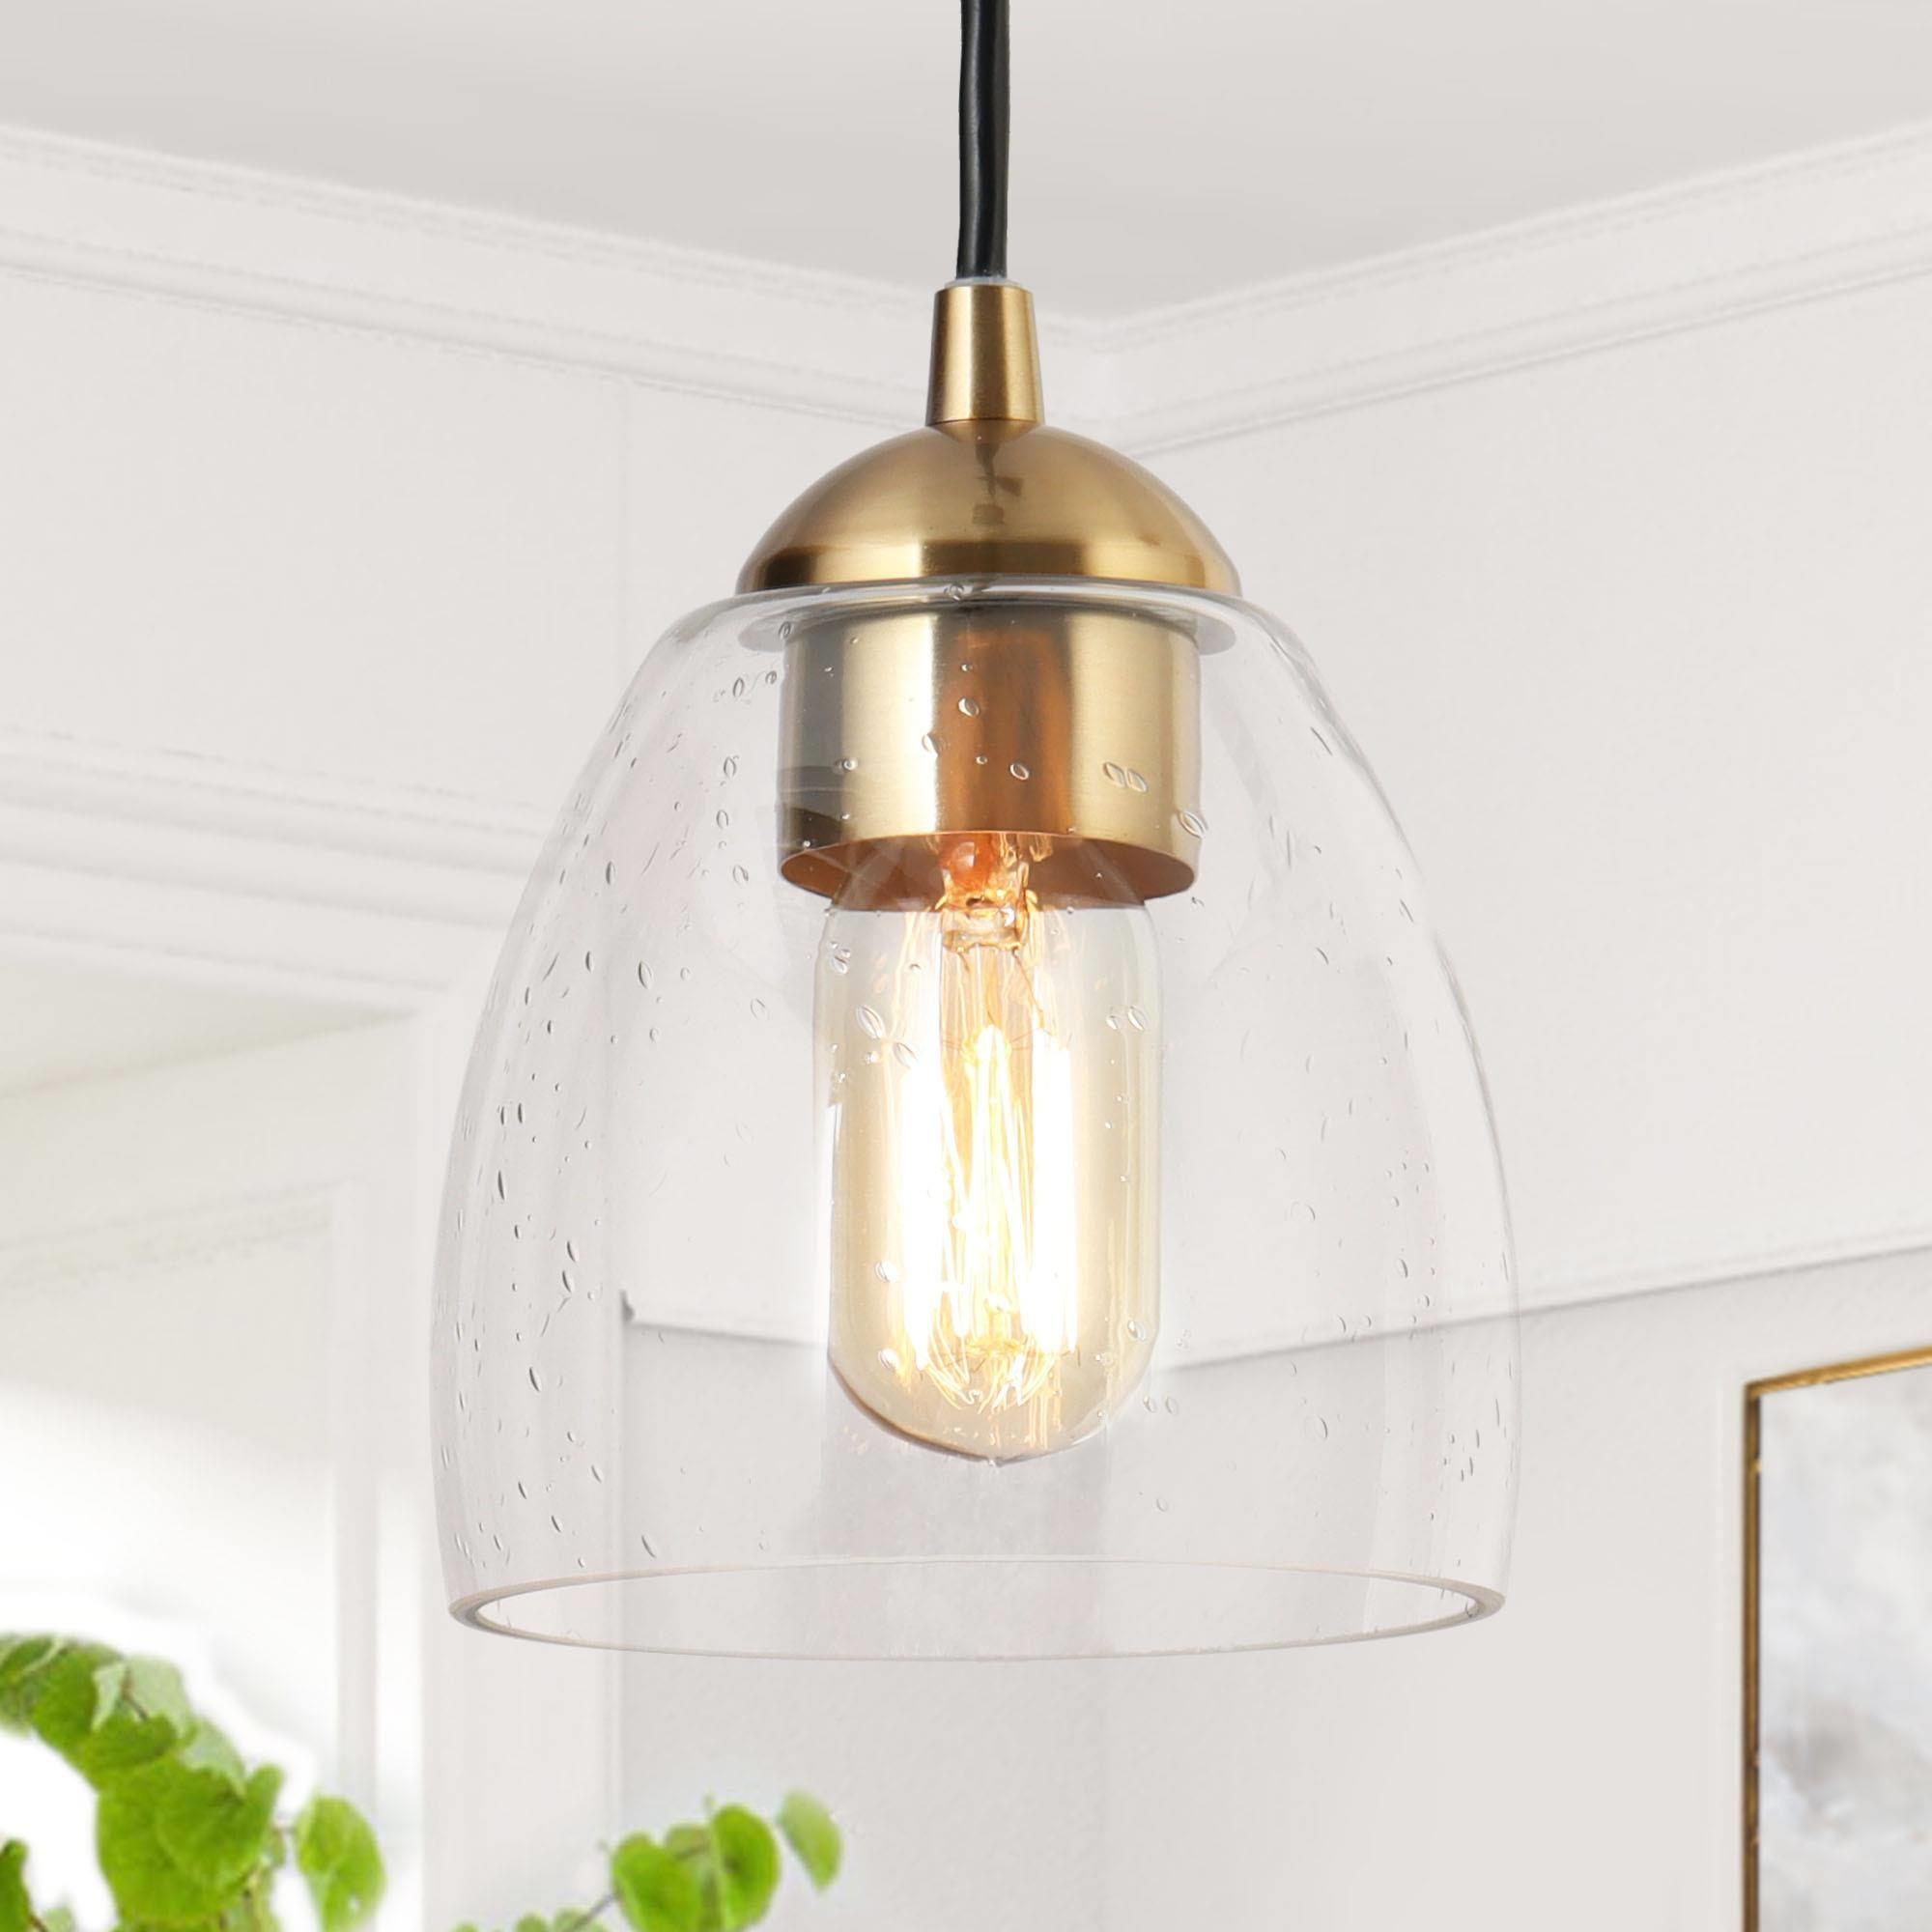 ZEVNI Harare Black/Brass Transitional Seeded Glass Dome LED Mini ...